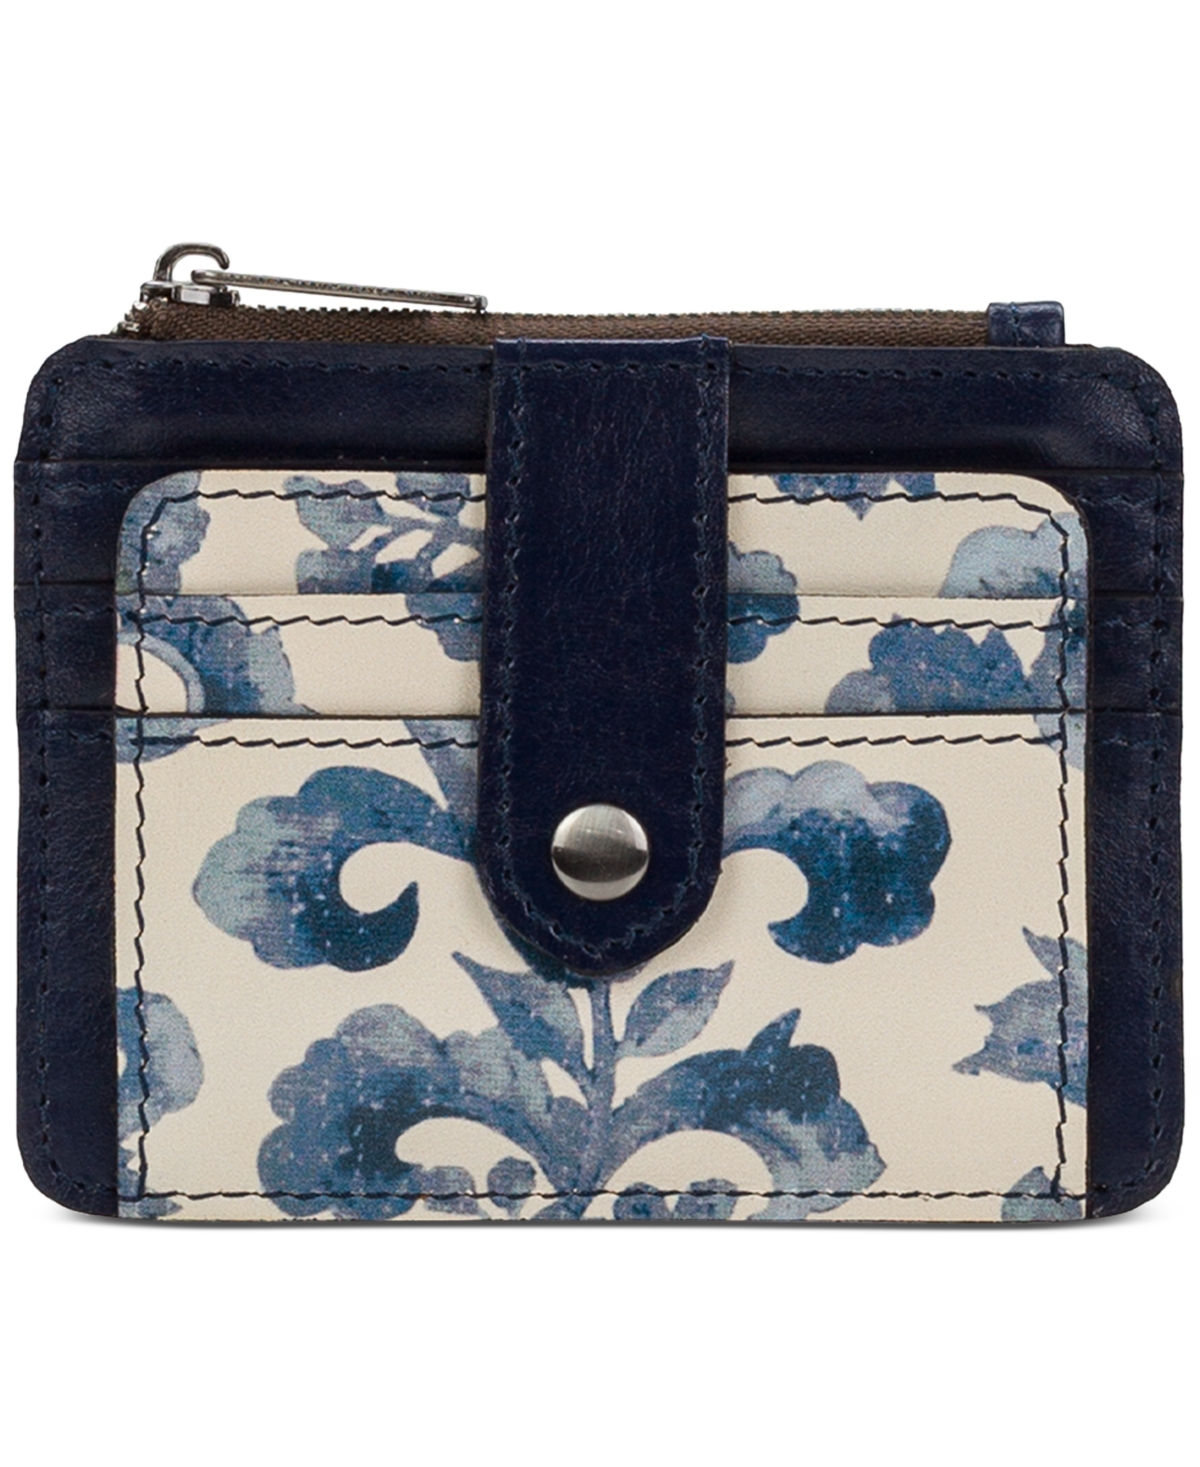 Cassis Id Small Printed Leather Wallet - Blue